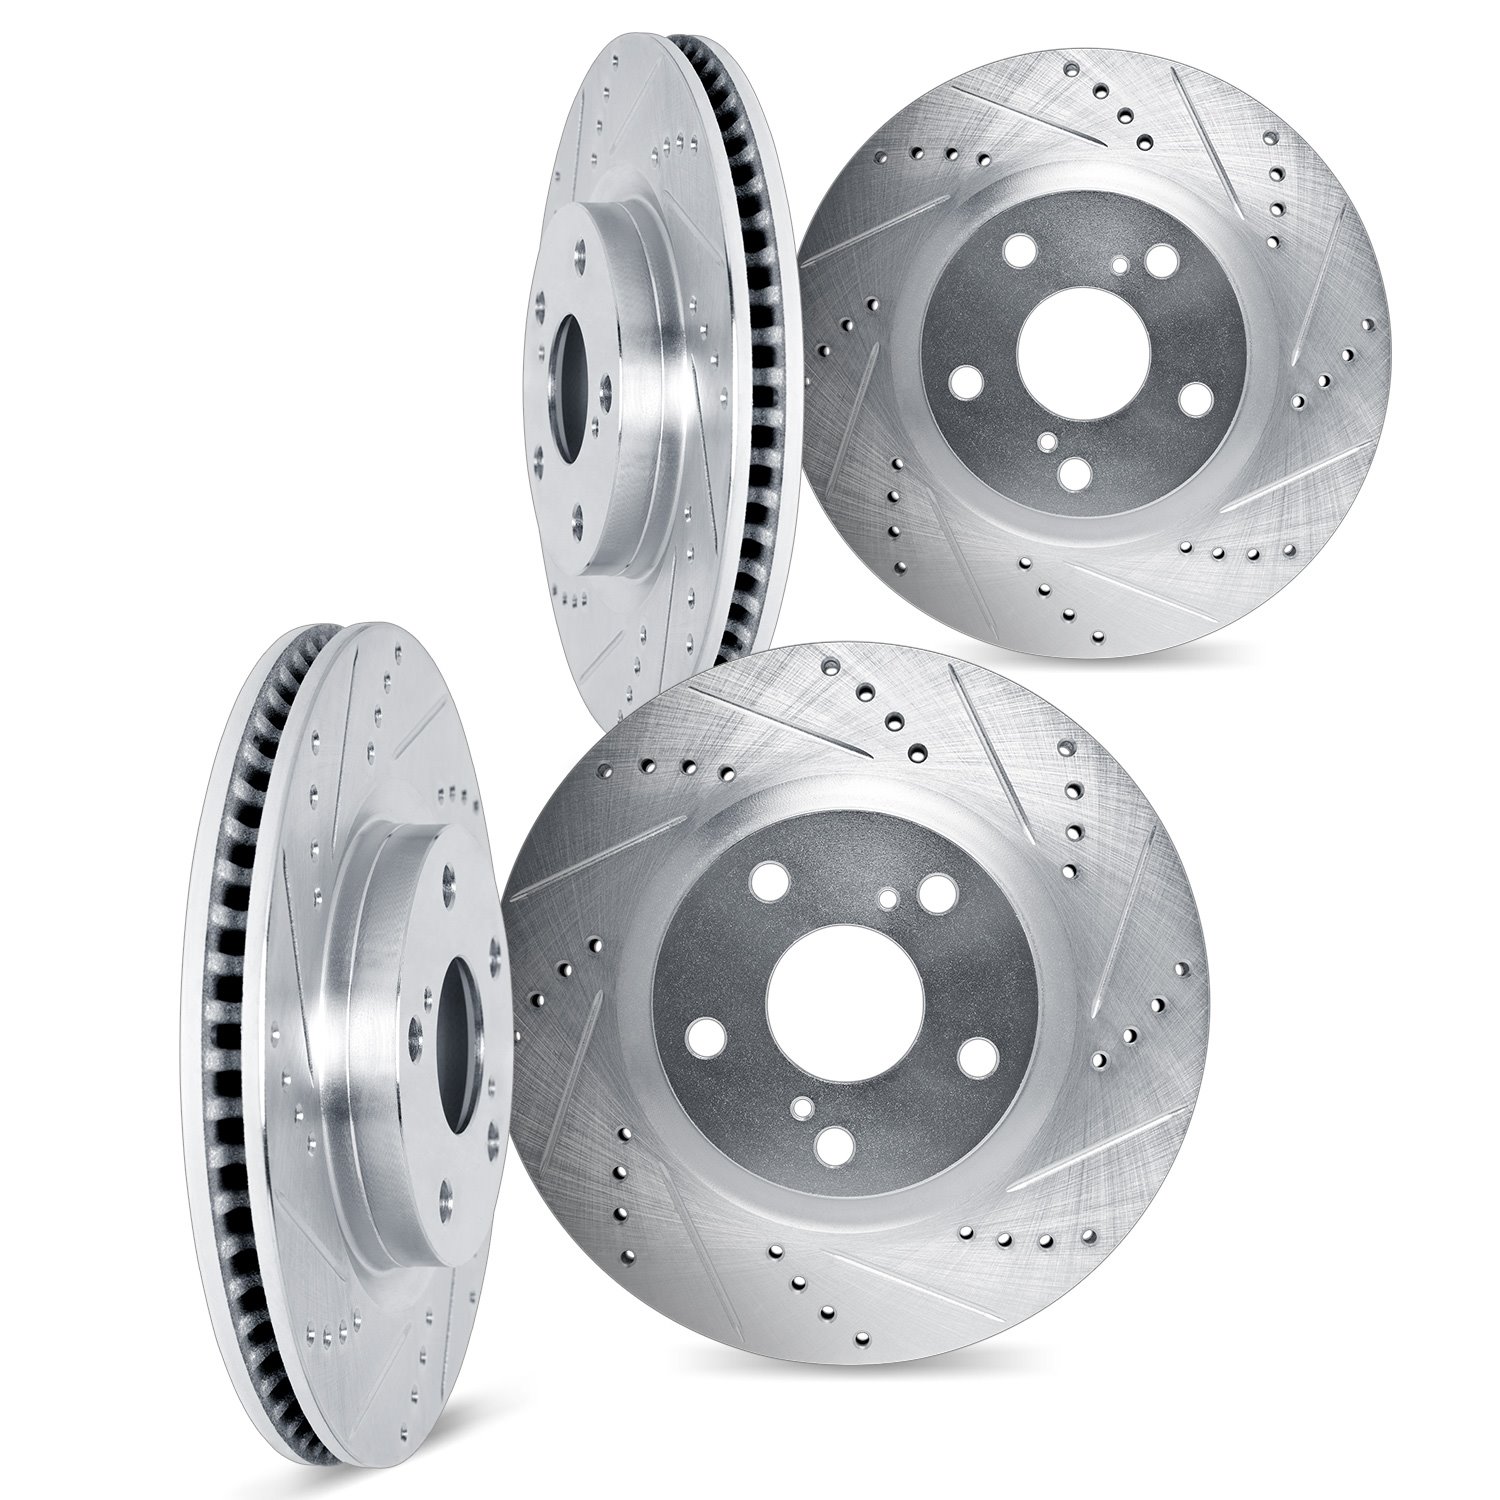 7004-73064 Drilled/Slotted Brake Rotors [Silver], 2001-2003 Audi/Volkswagen, Position: Front and Rear